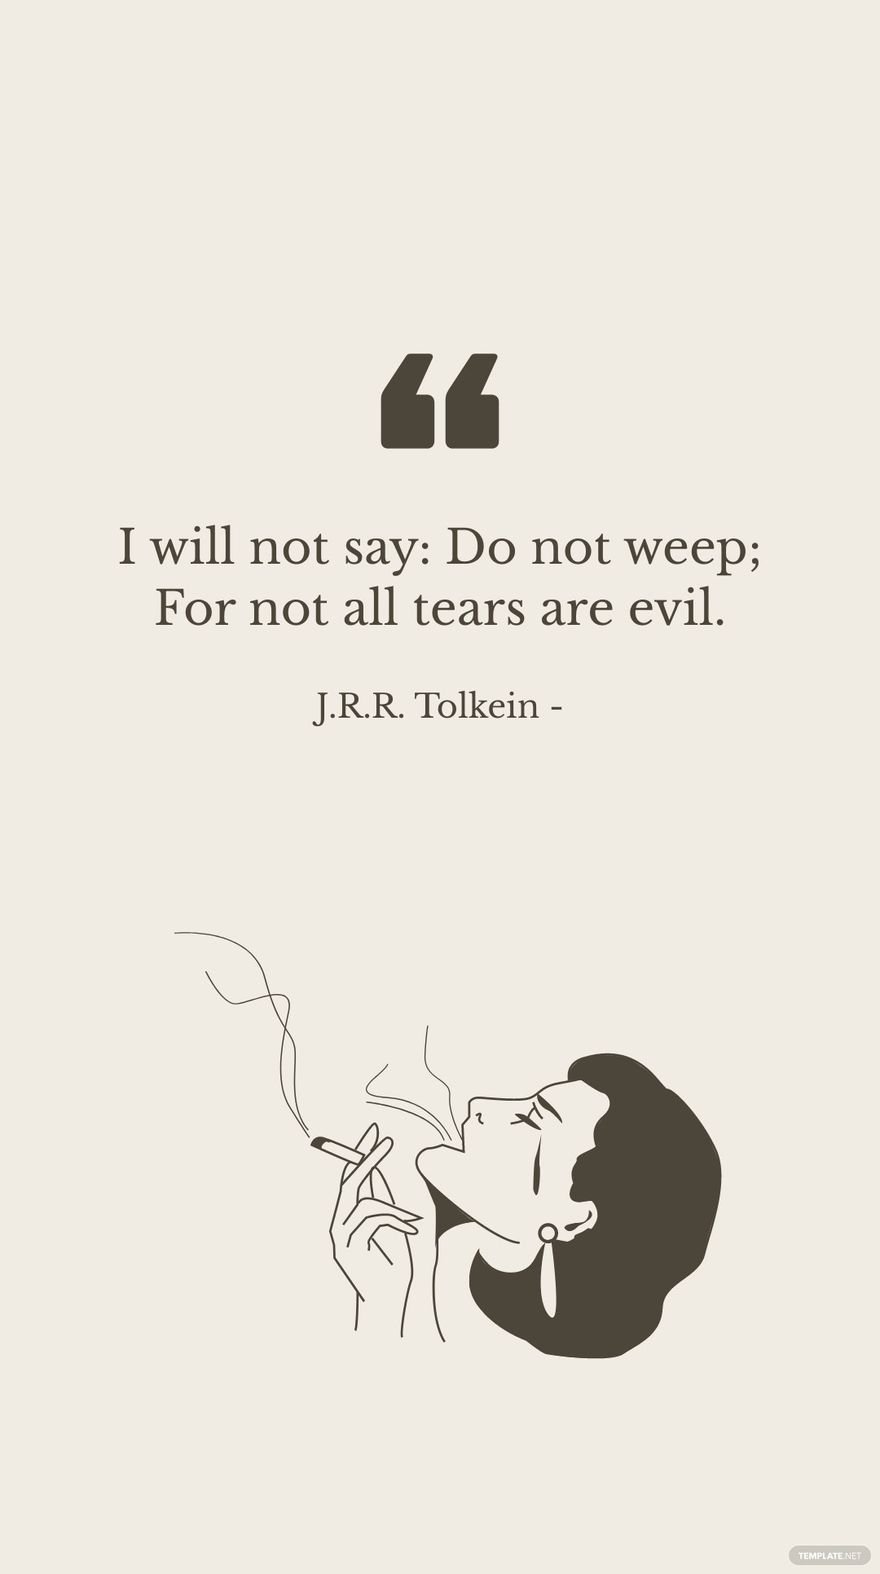 J.R.R. Tolkein - I will not say: Do not weep; For not all tears are evil.